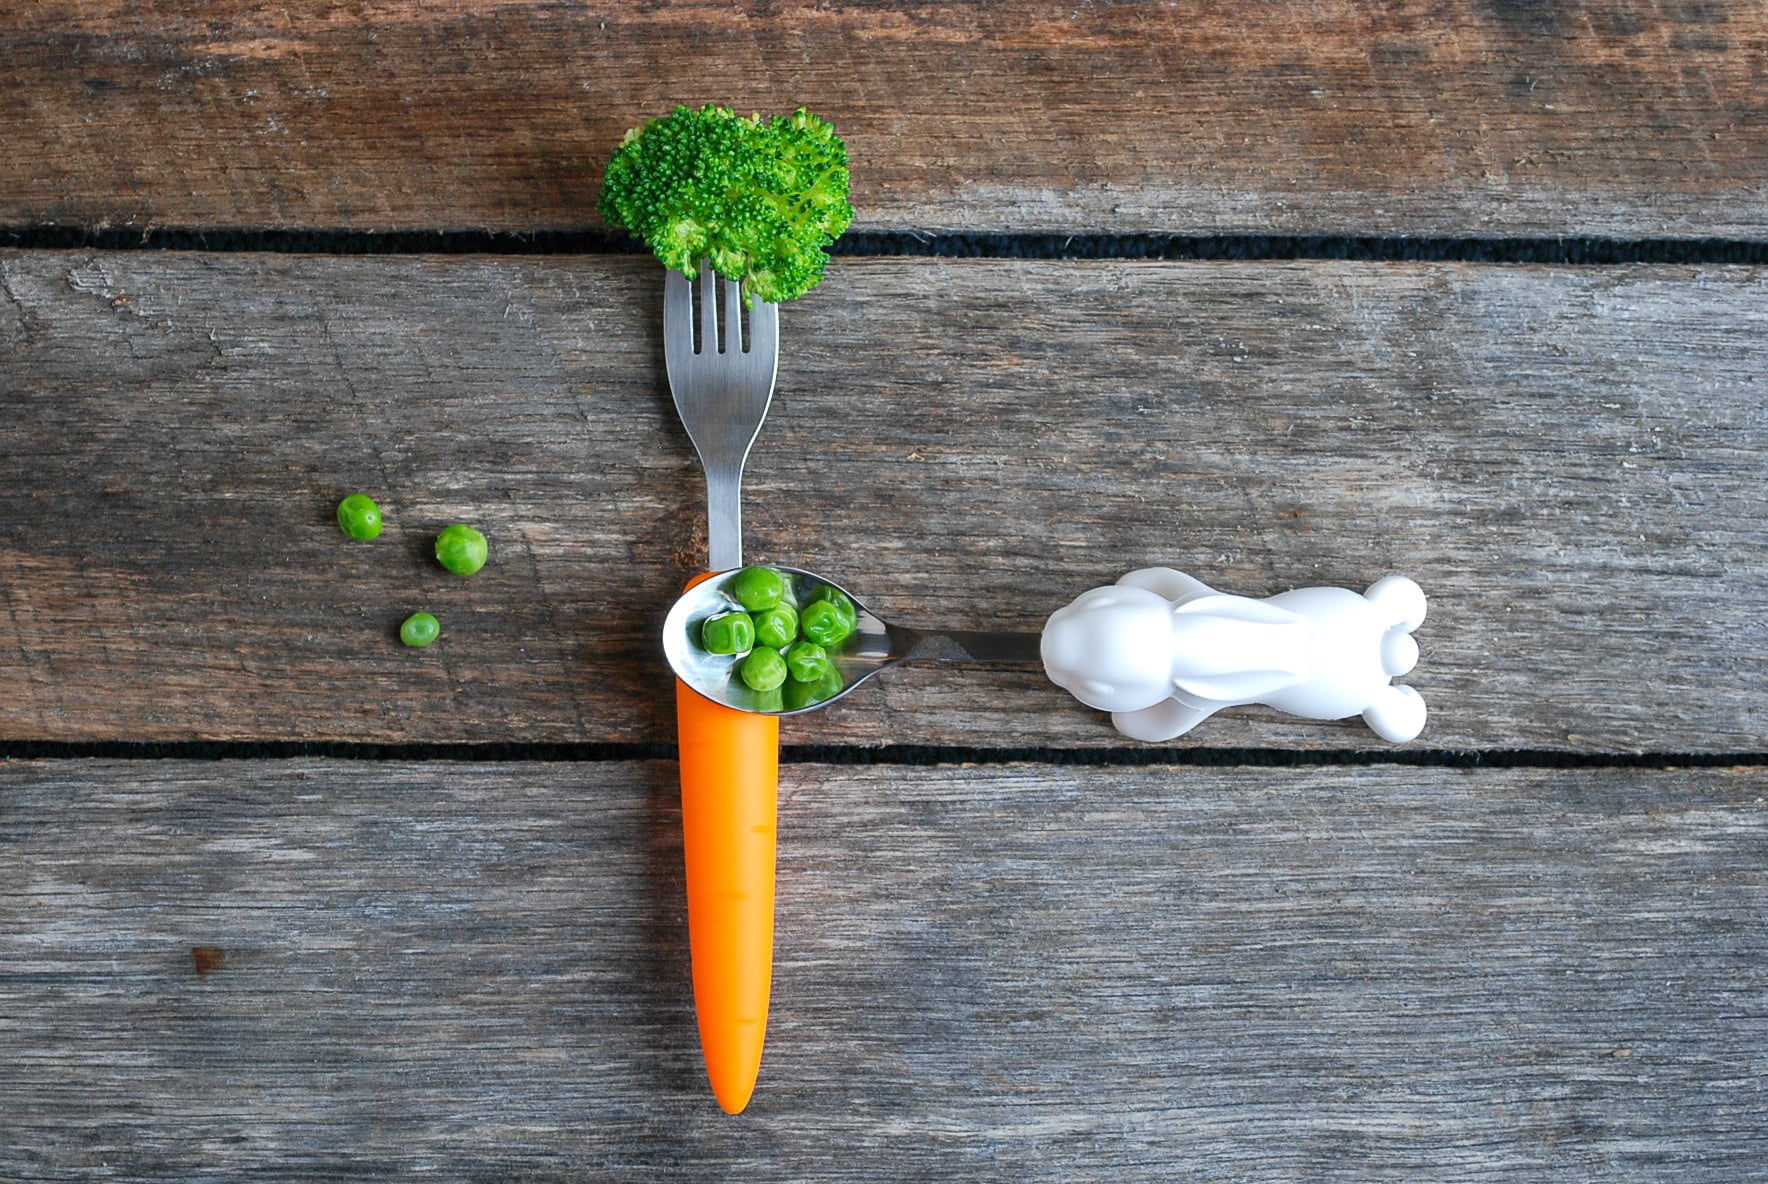 A fork with a handle like a carrot holds a piece of broccoli, and a spoon with a handle shaped like a rabbit holds some peas. Both are sitting on a wood table.